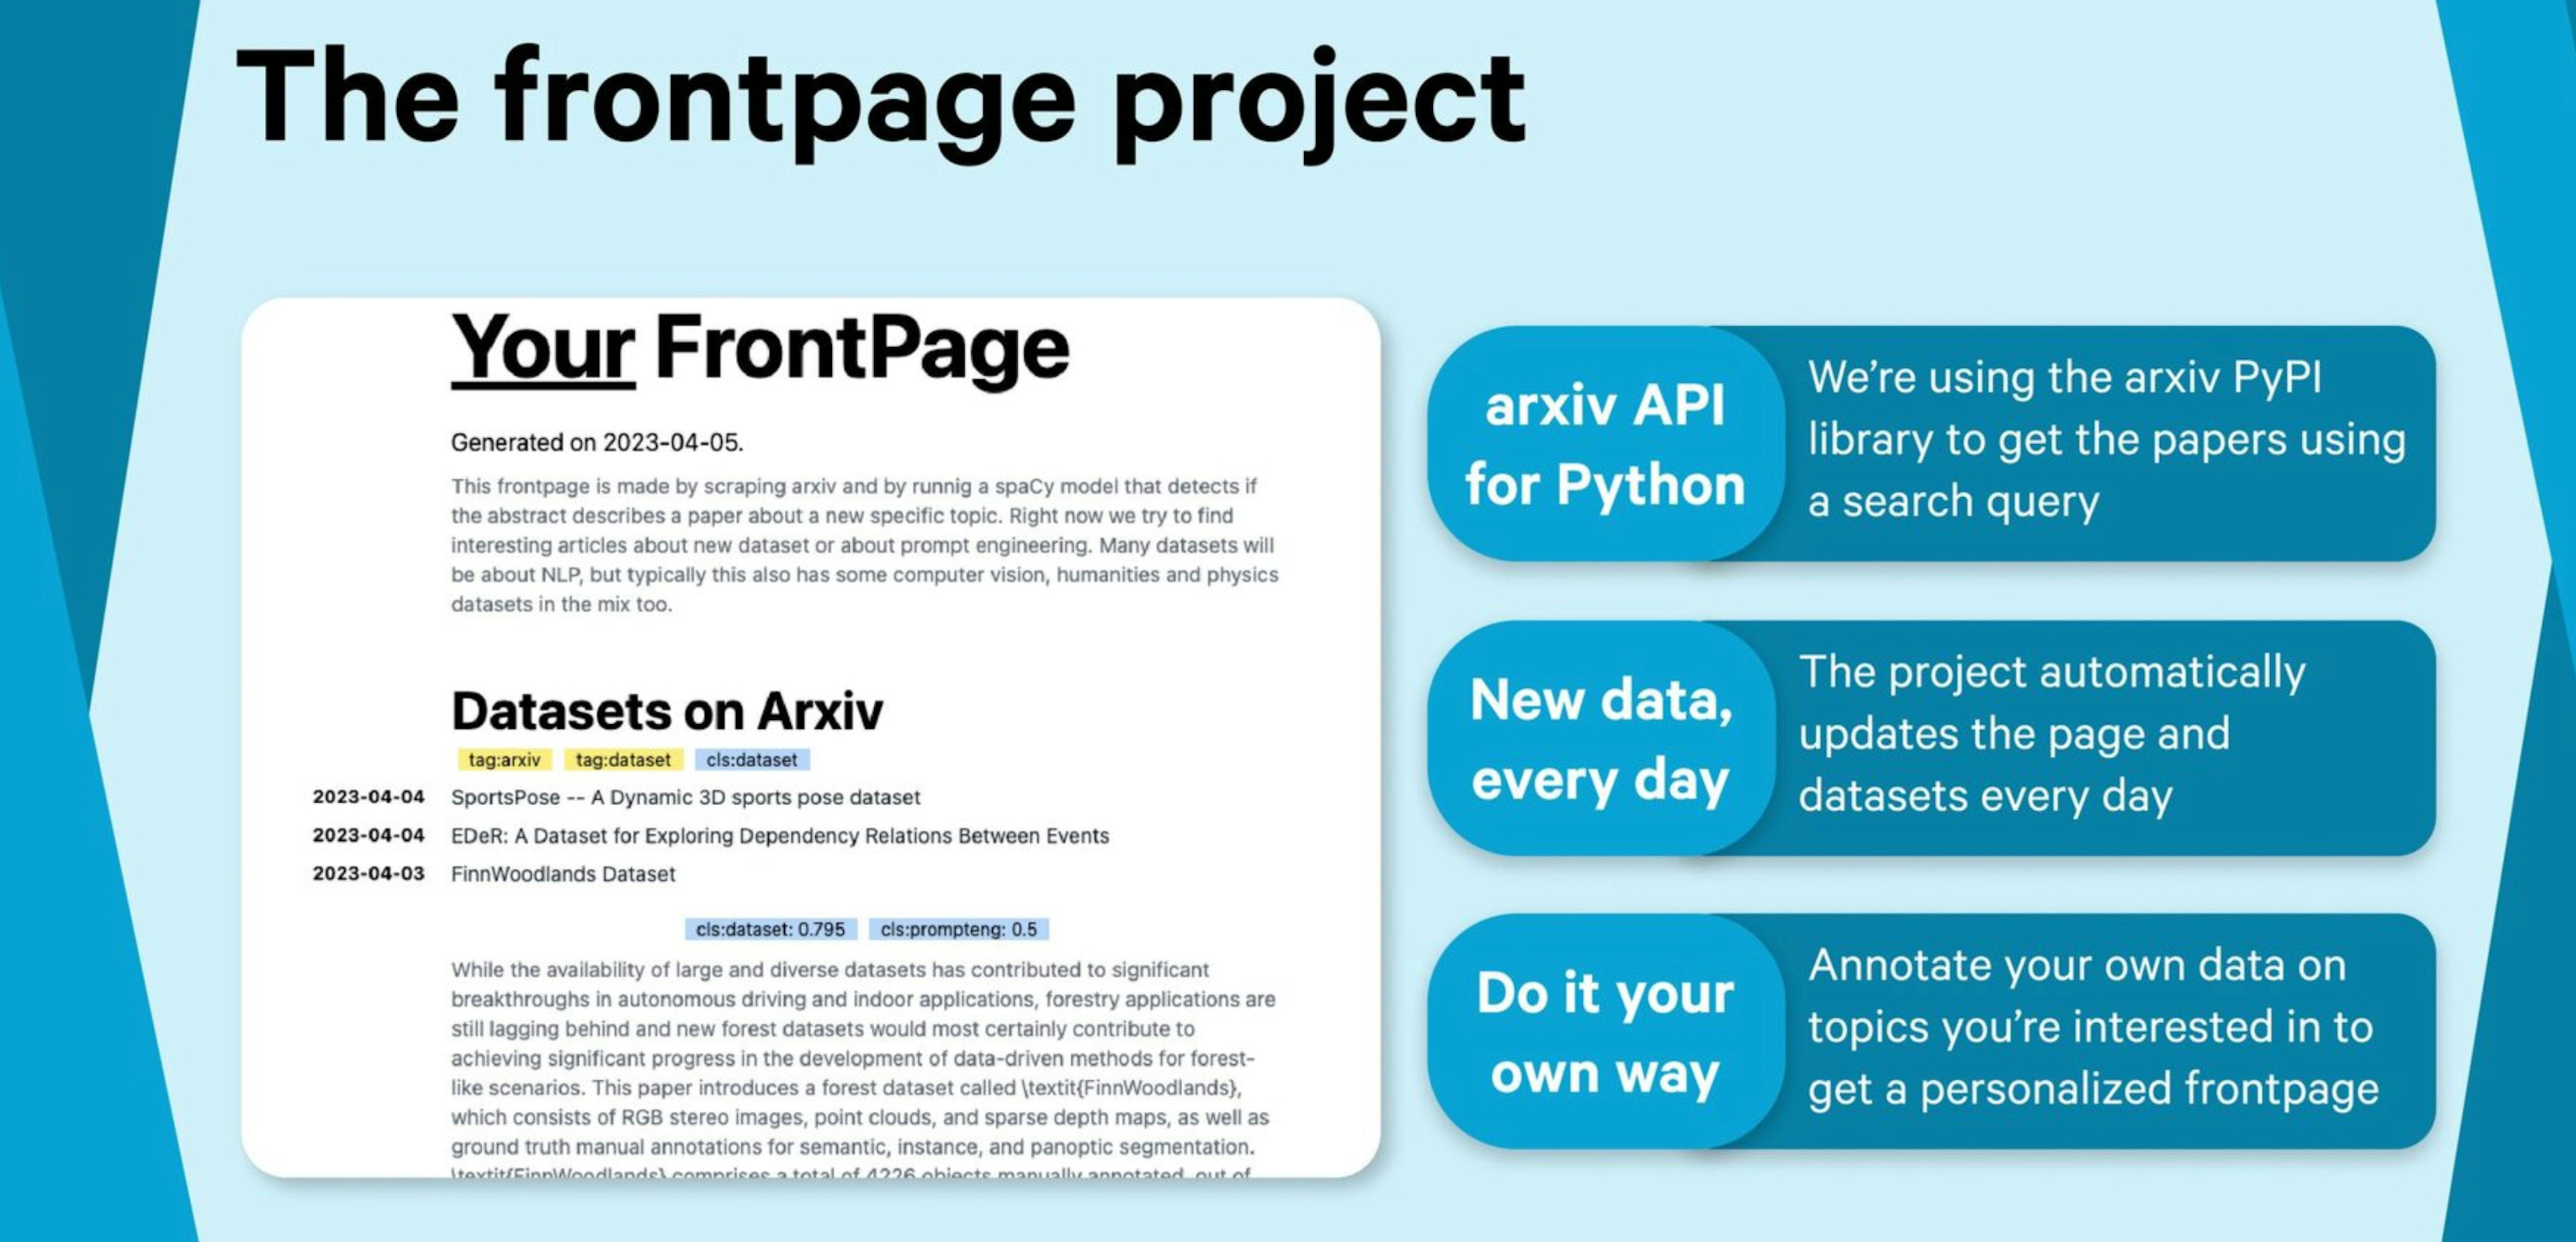 You are what you read: Building a personal internet front-page with spaCy and Prodigy